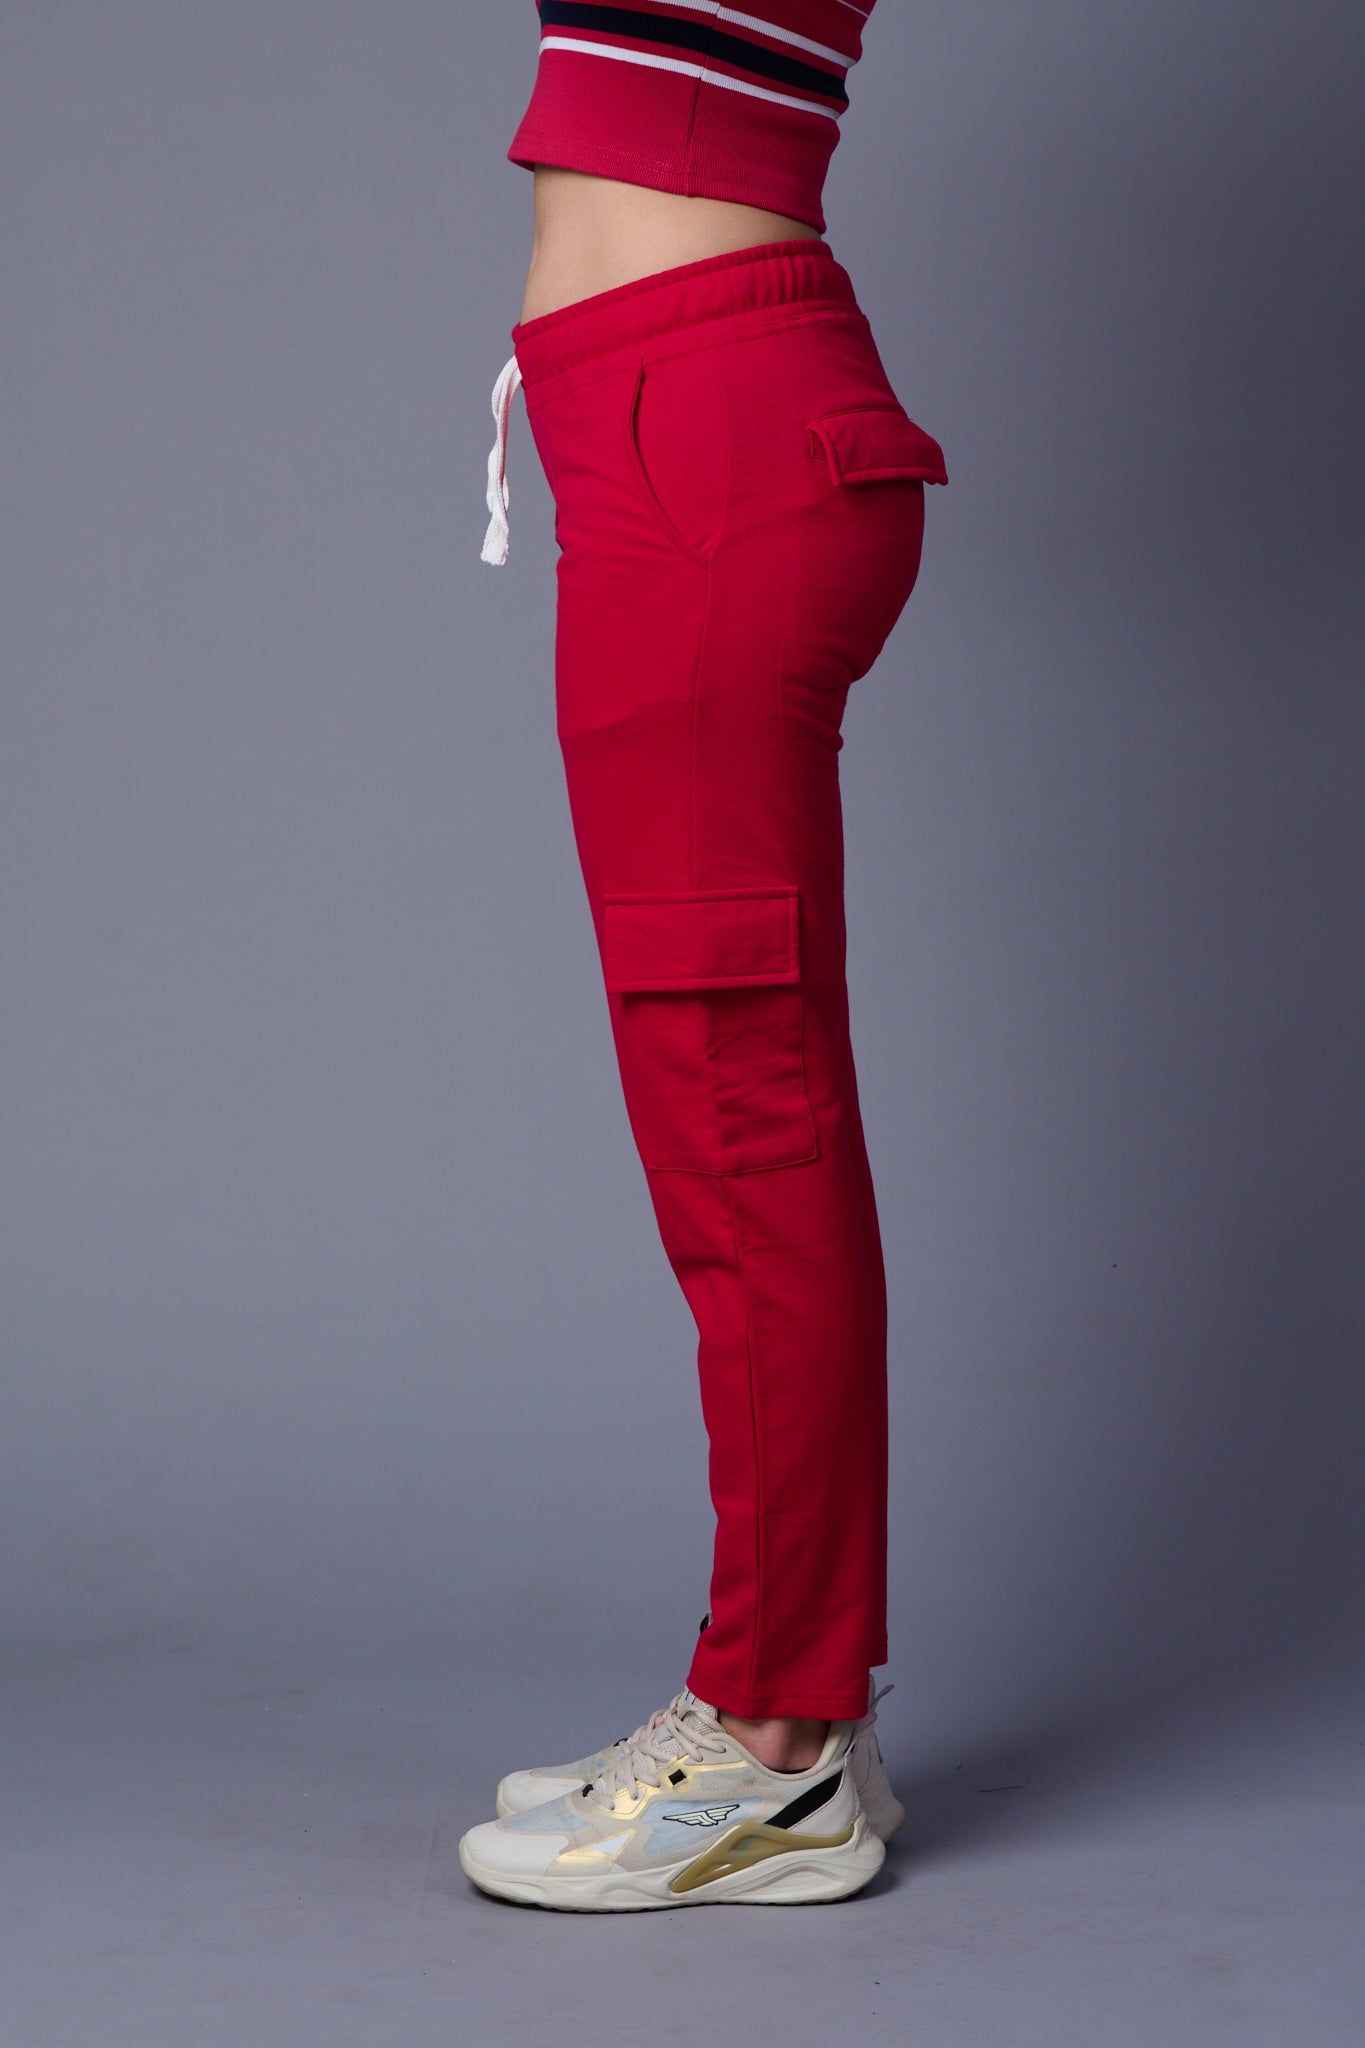 Plain Red Joggers for Women